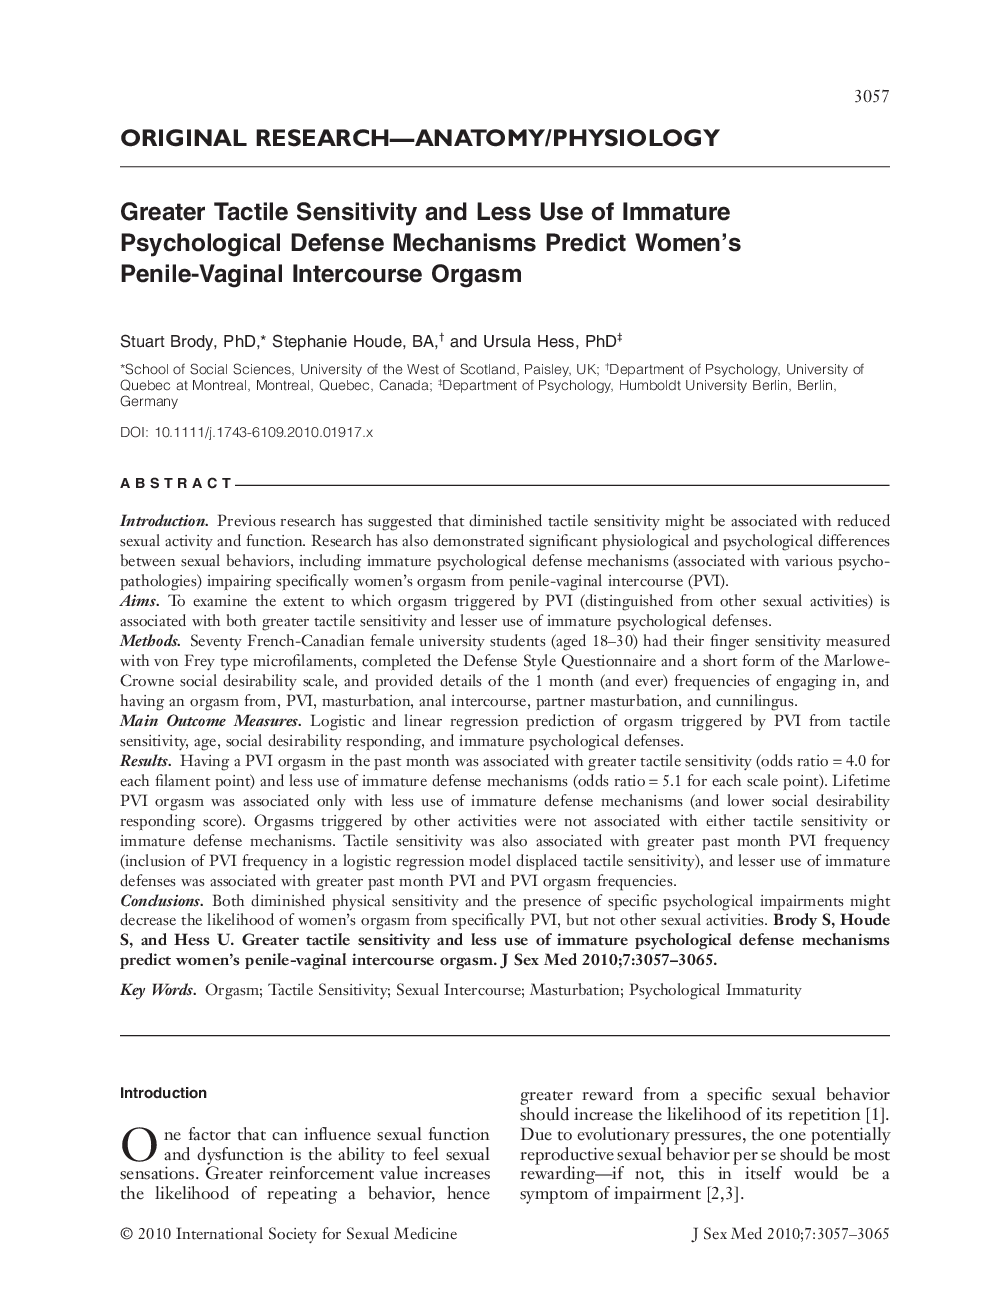 Greater Tactile Sensitivity and Less Use of Immature Psychological Defense Mechanisms Predict Women's Penile-Vaginal Intercourse Orgasm